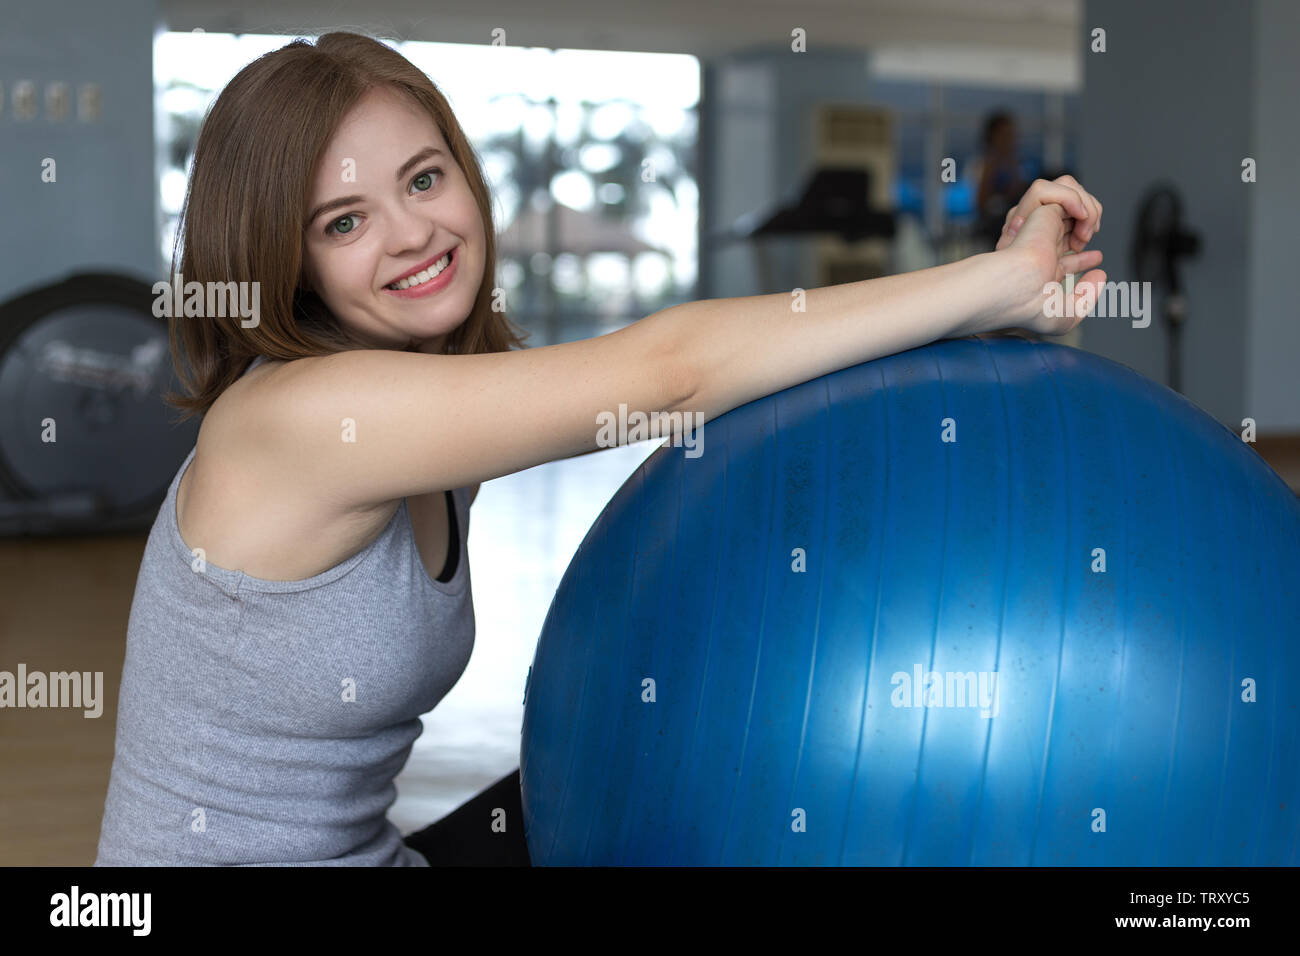 Smiling young caucasian woman girl on blue gymnastic ball at the gym, doing workout or yoga pilates exercise Stock Photo